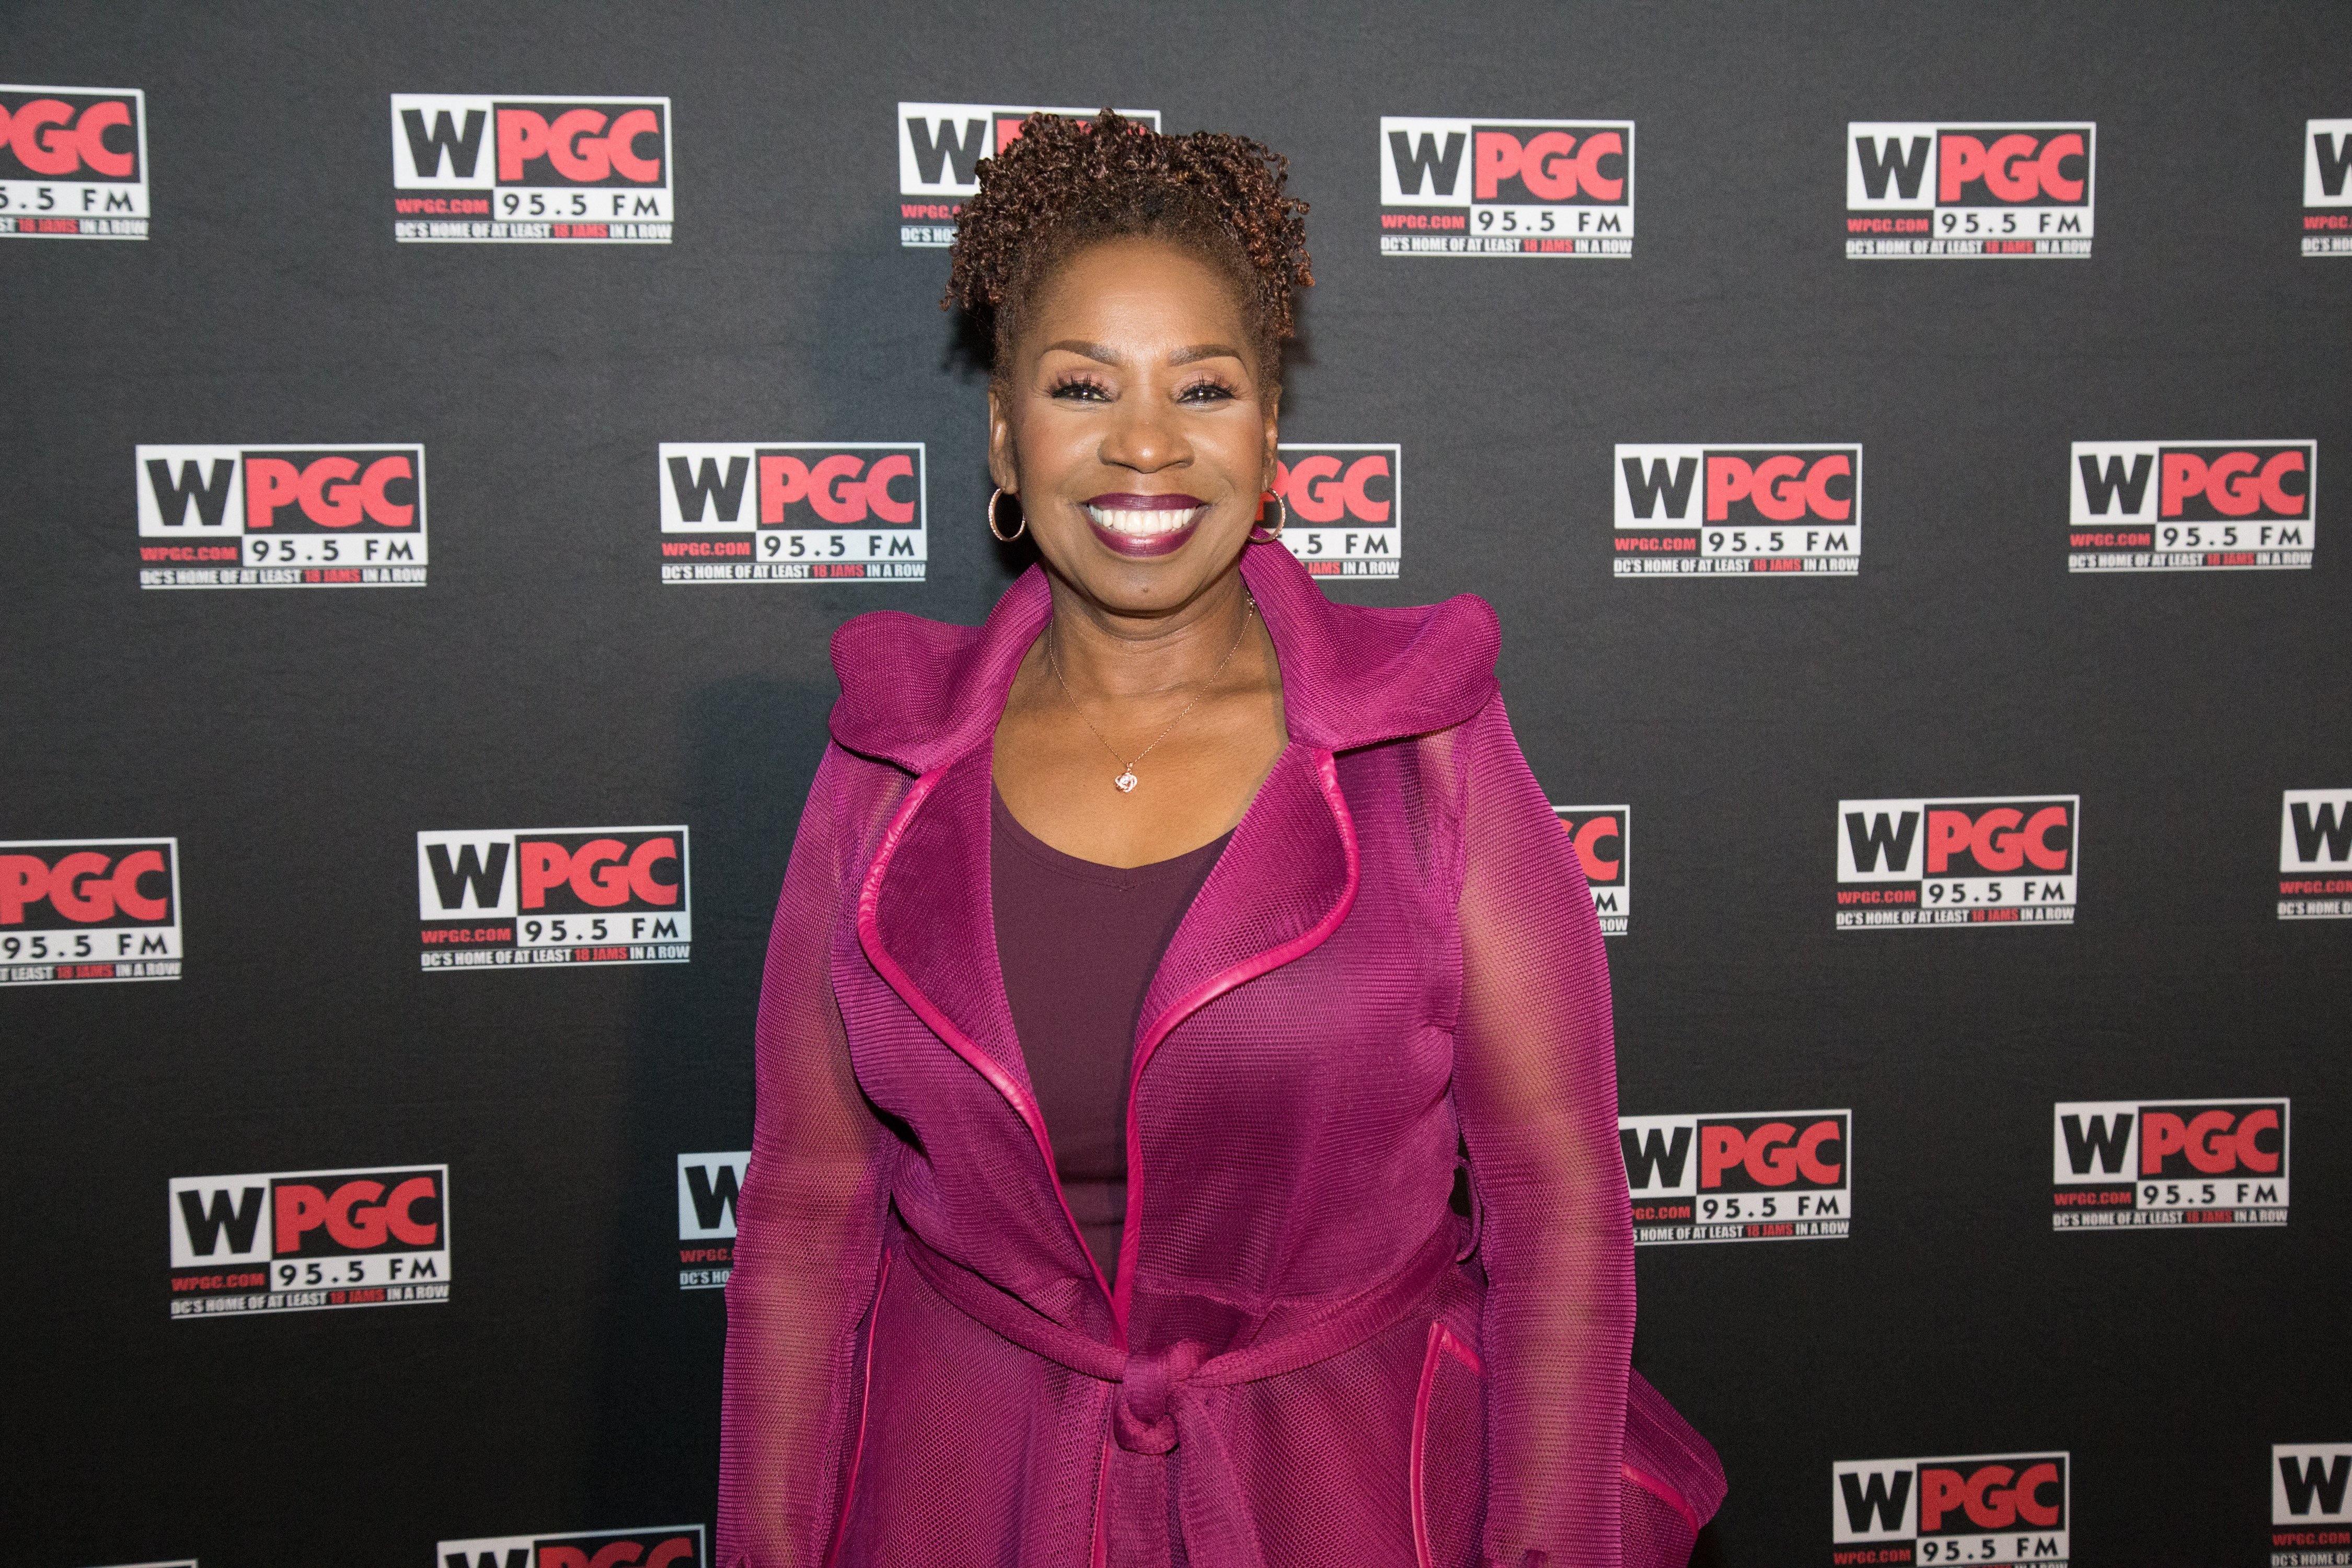  Iyanla Vanzant attends WPGC's 18th Annual For Sisters Only at Walter E. Washington Convention Center on November 4, 2017 in Washington, DC | Photo: GettyImages